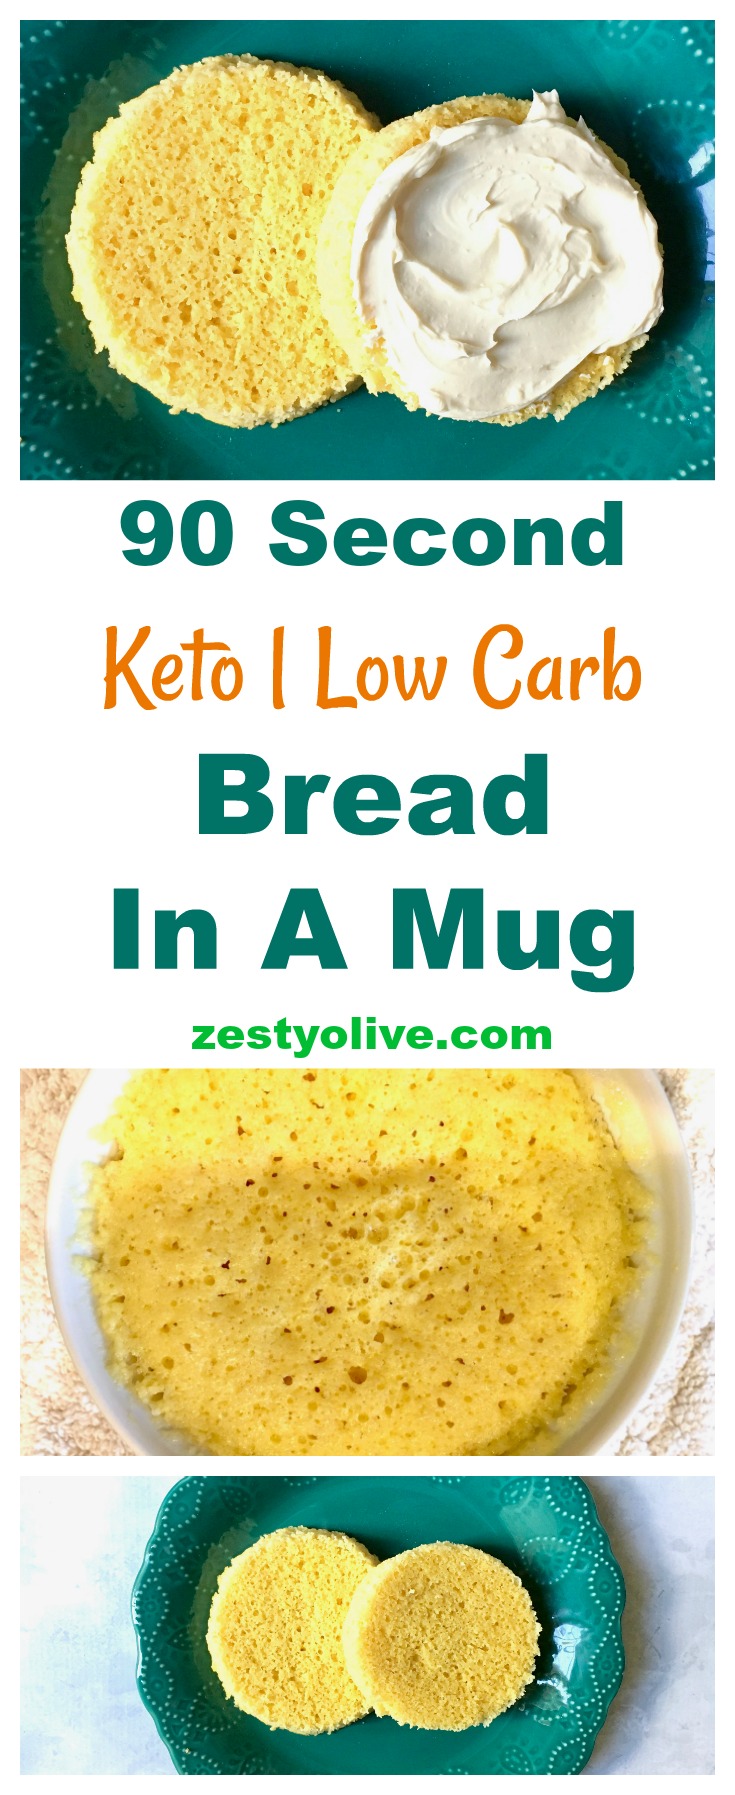 How To Make 90 Second Keto Low Carb Bread In A Mug * Zesty Olive ...